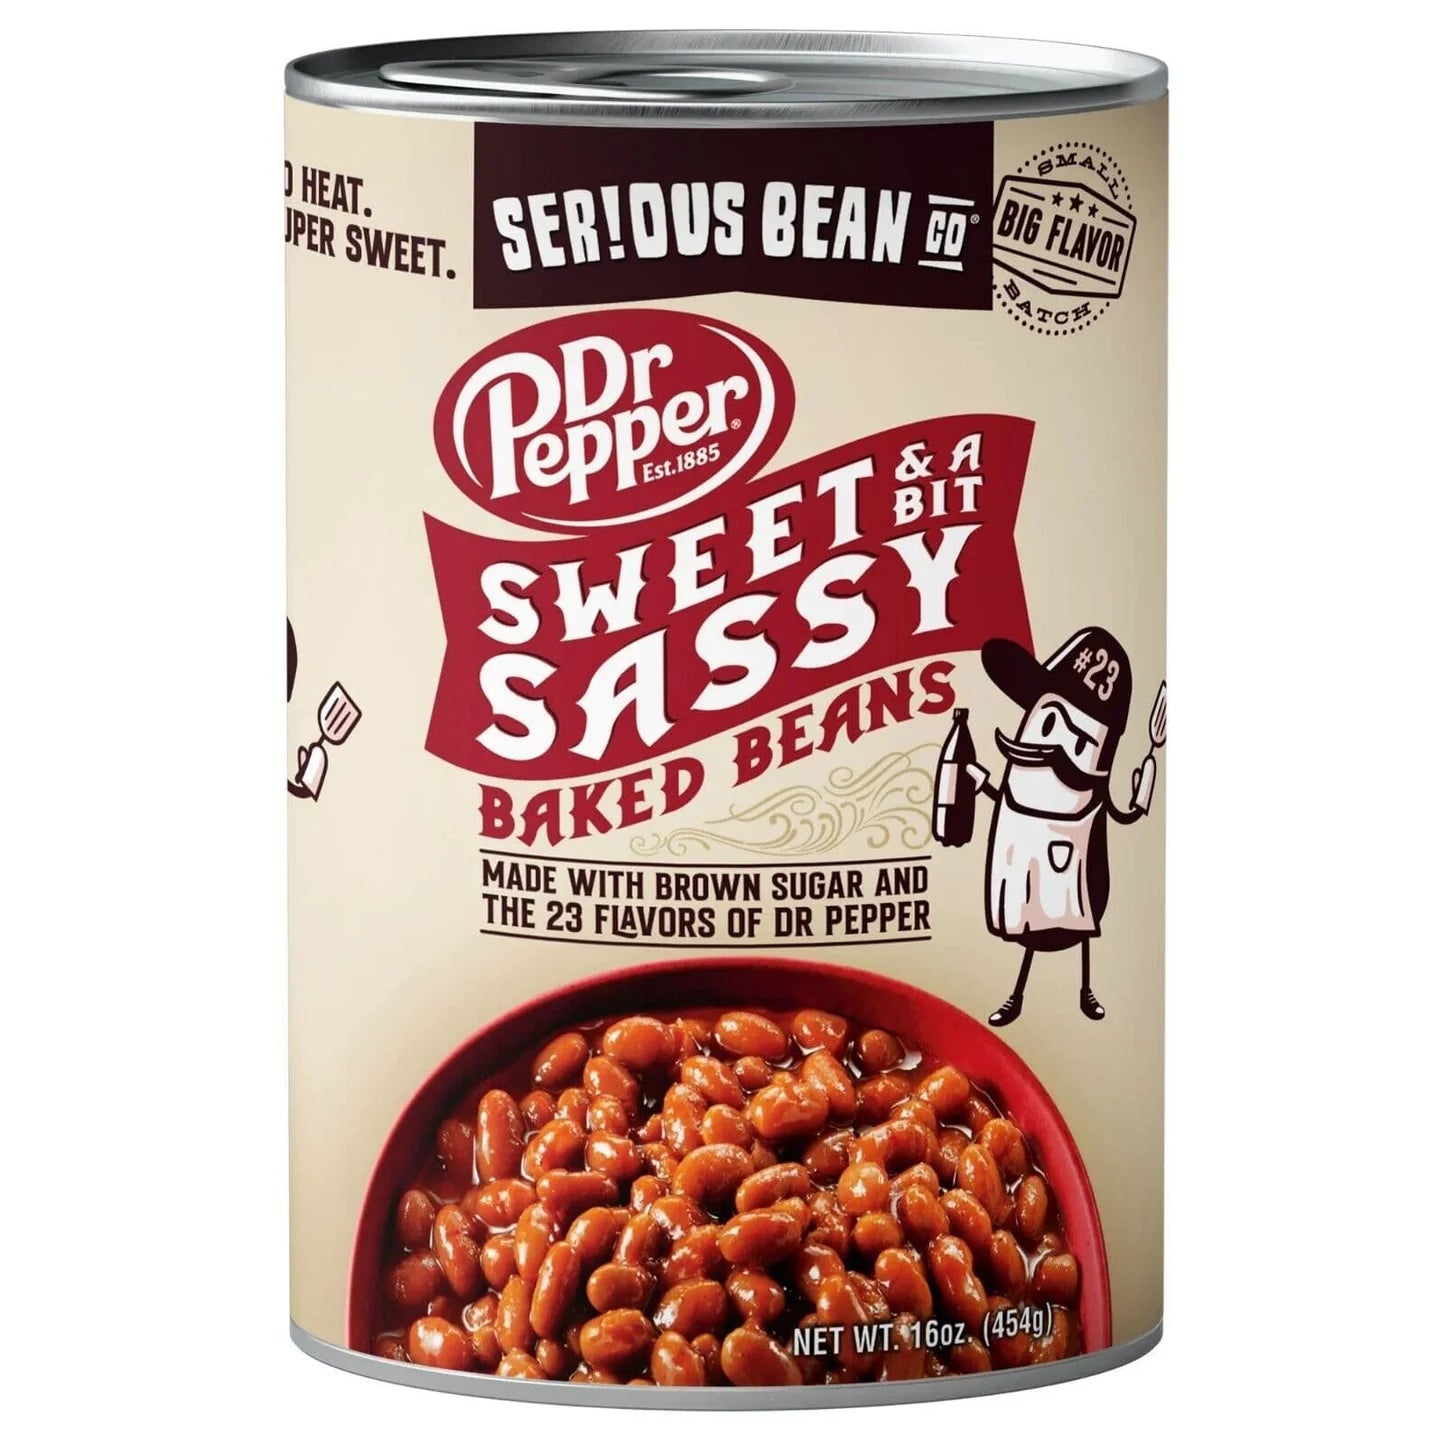 Serious Bean Co. - Dr Pepper Baked Beans "Sweet And A Bit Sassy" - 454g